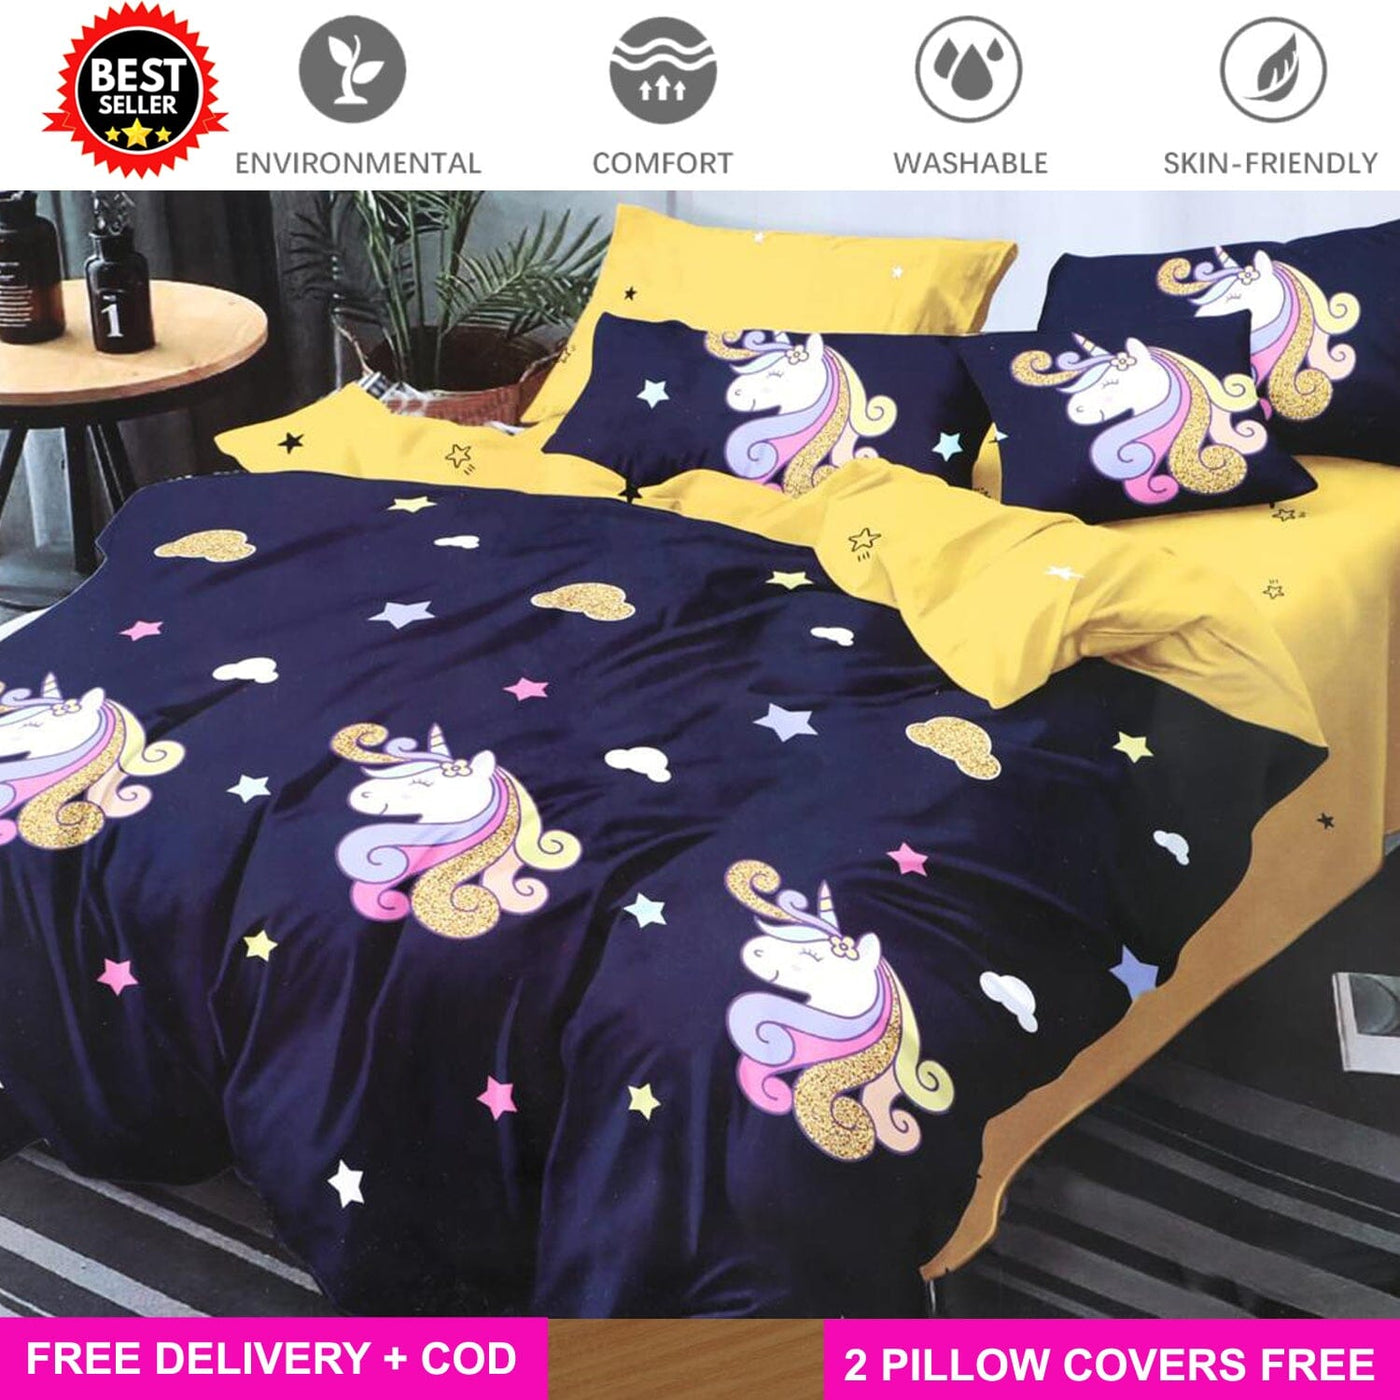 Blue Unicorn Full Elastic Fitted Bedsheet with 2 Pillow Covers - King Size Bed Sheets Great Happy IN 